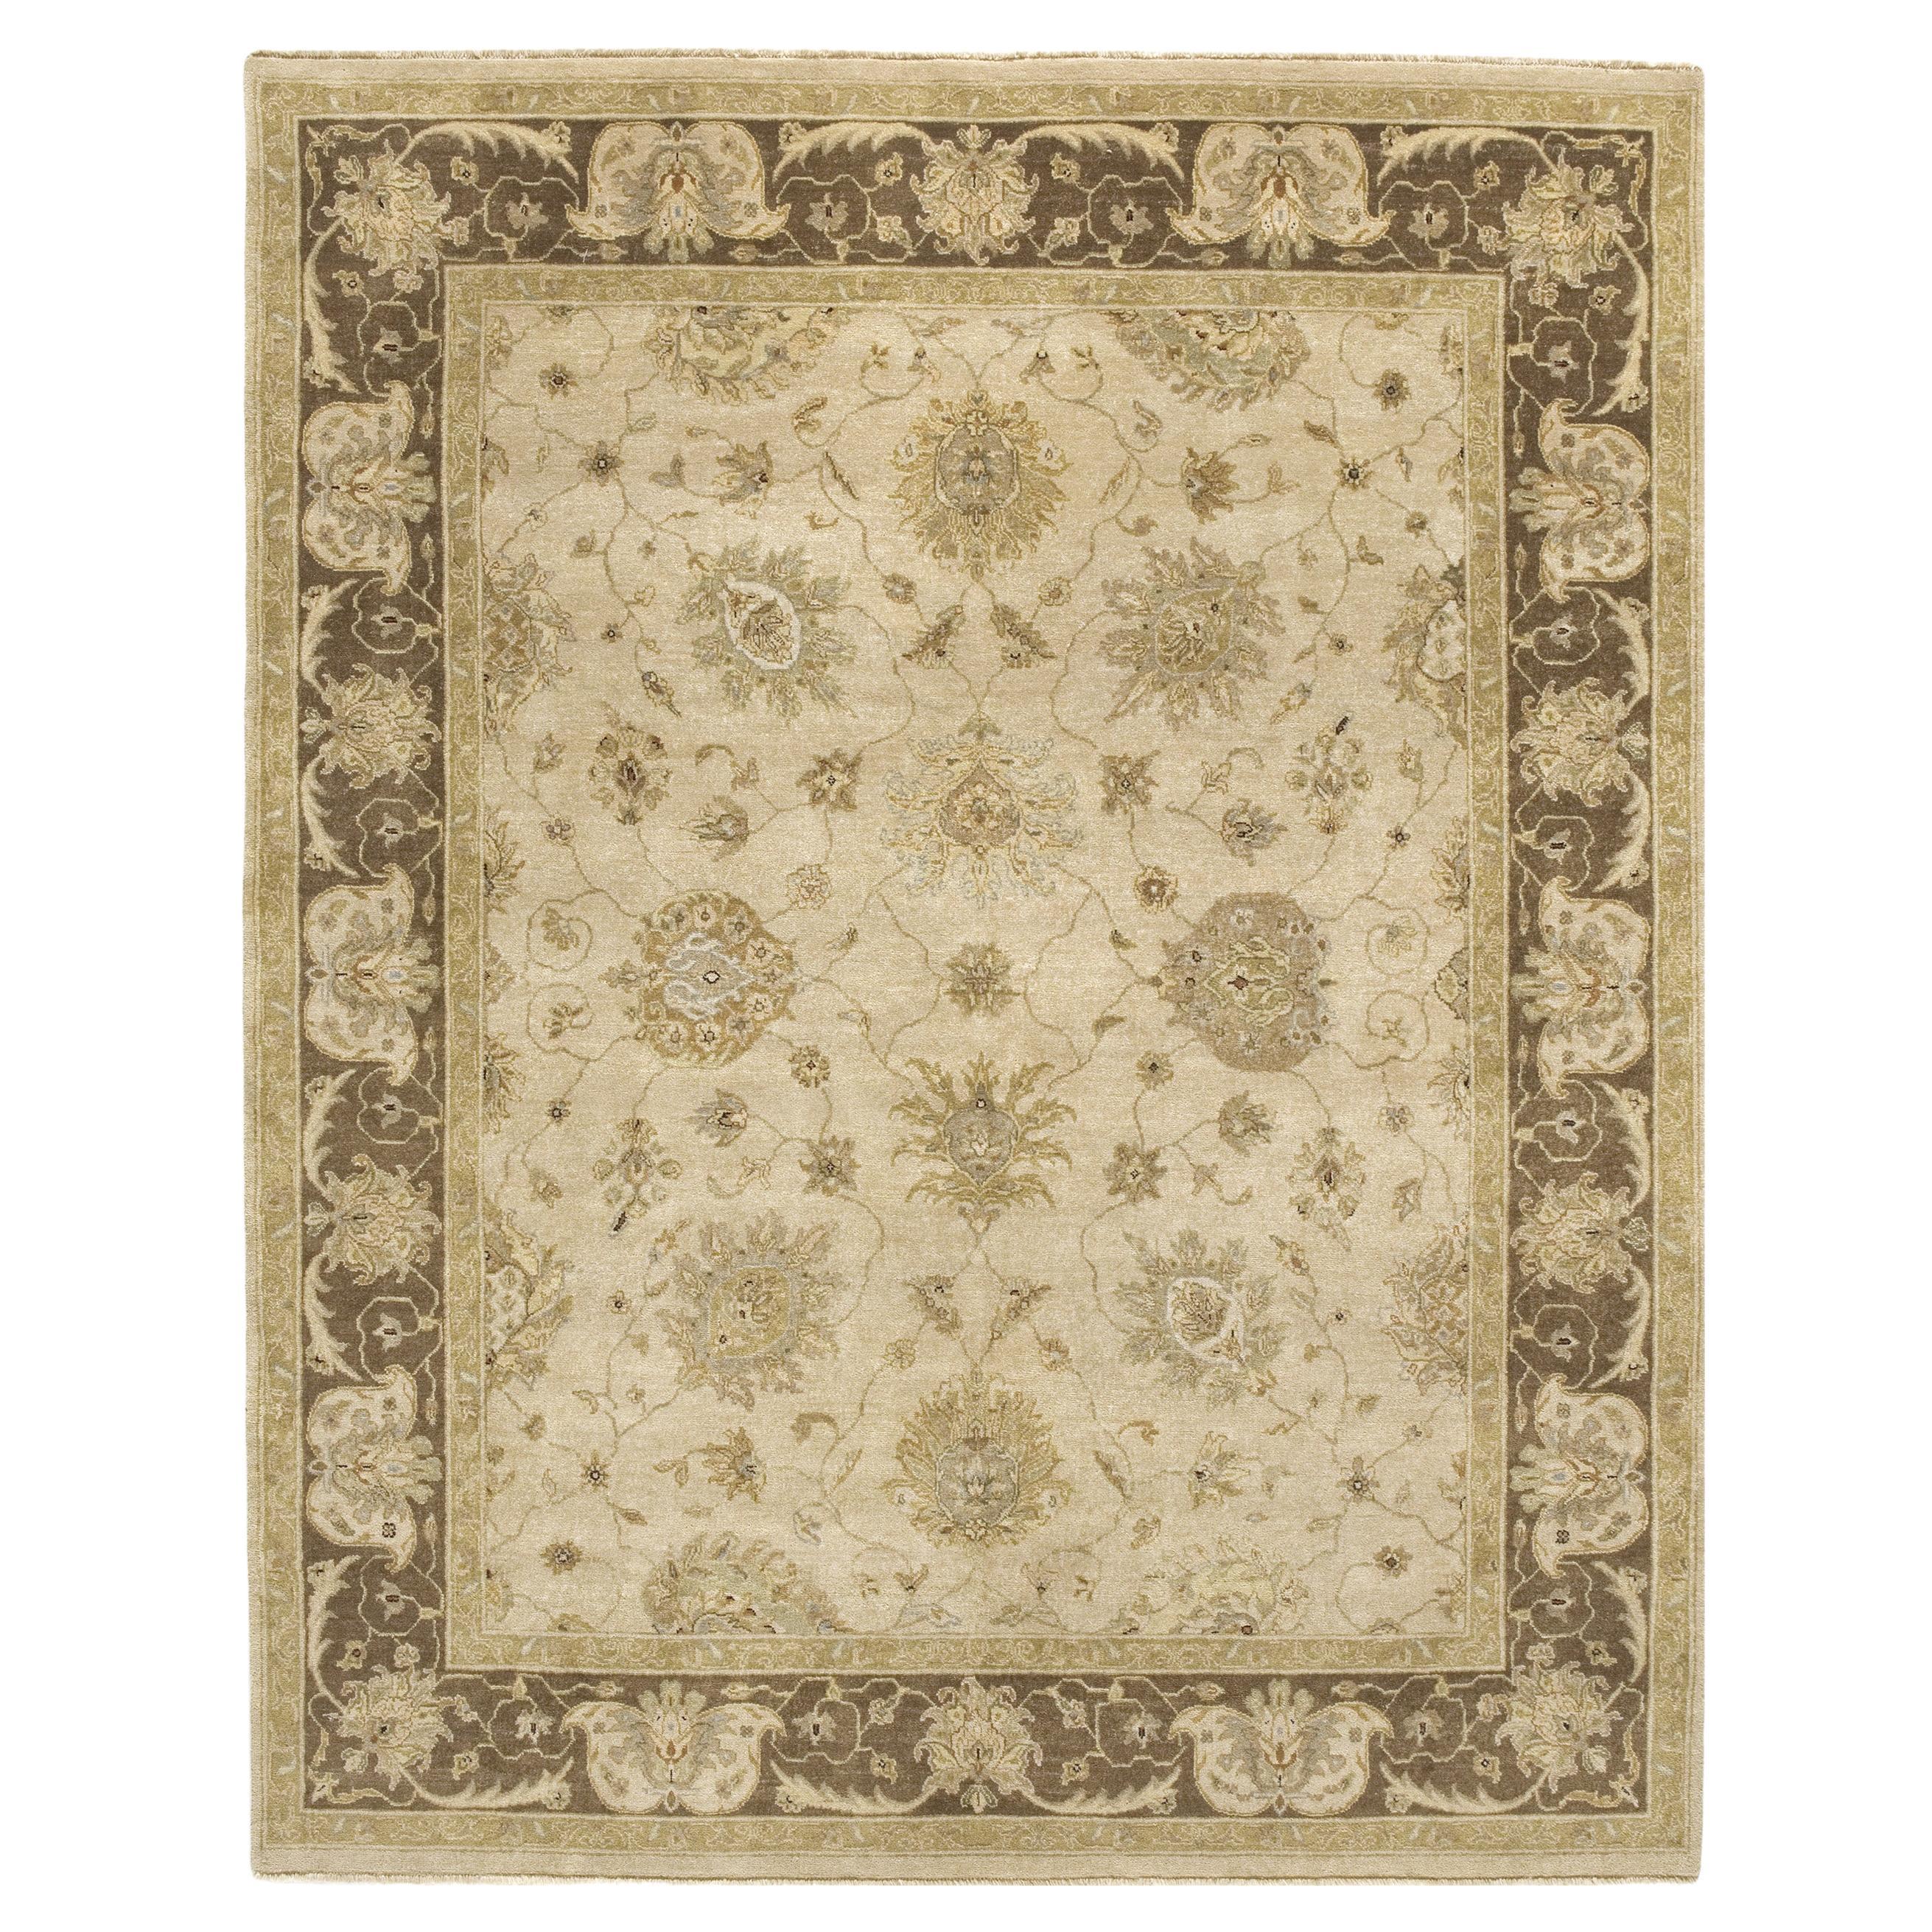 Luxury Traditional Hand-Knotted Amritsar Mogul Beige/Brown 14x28 Rug